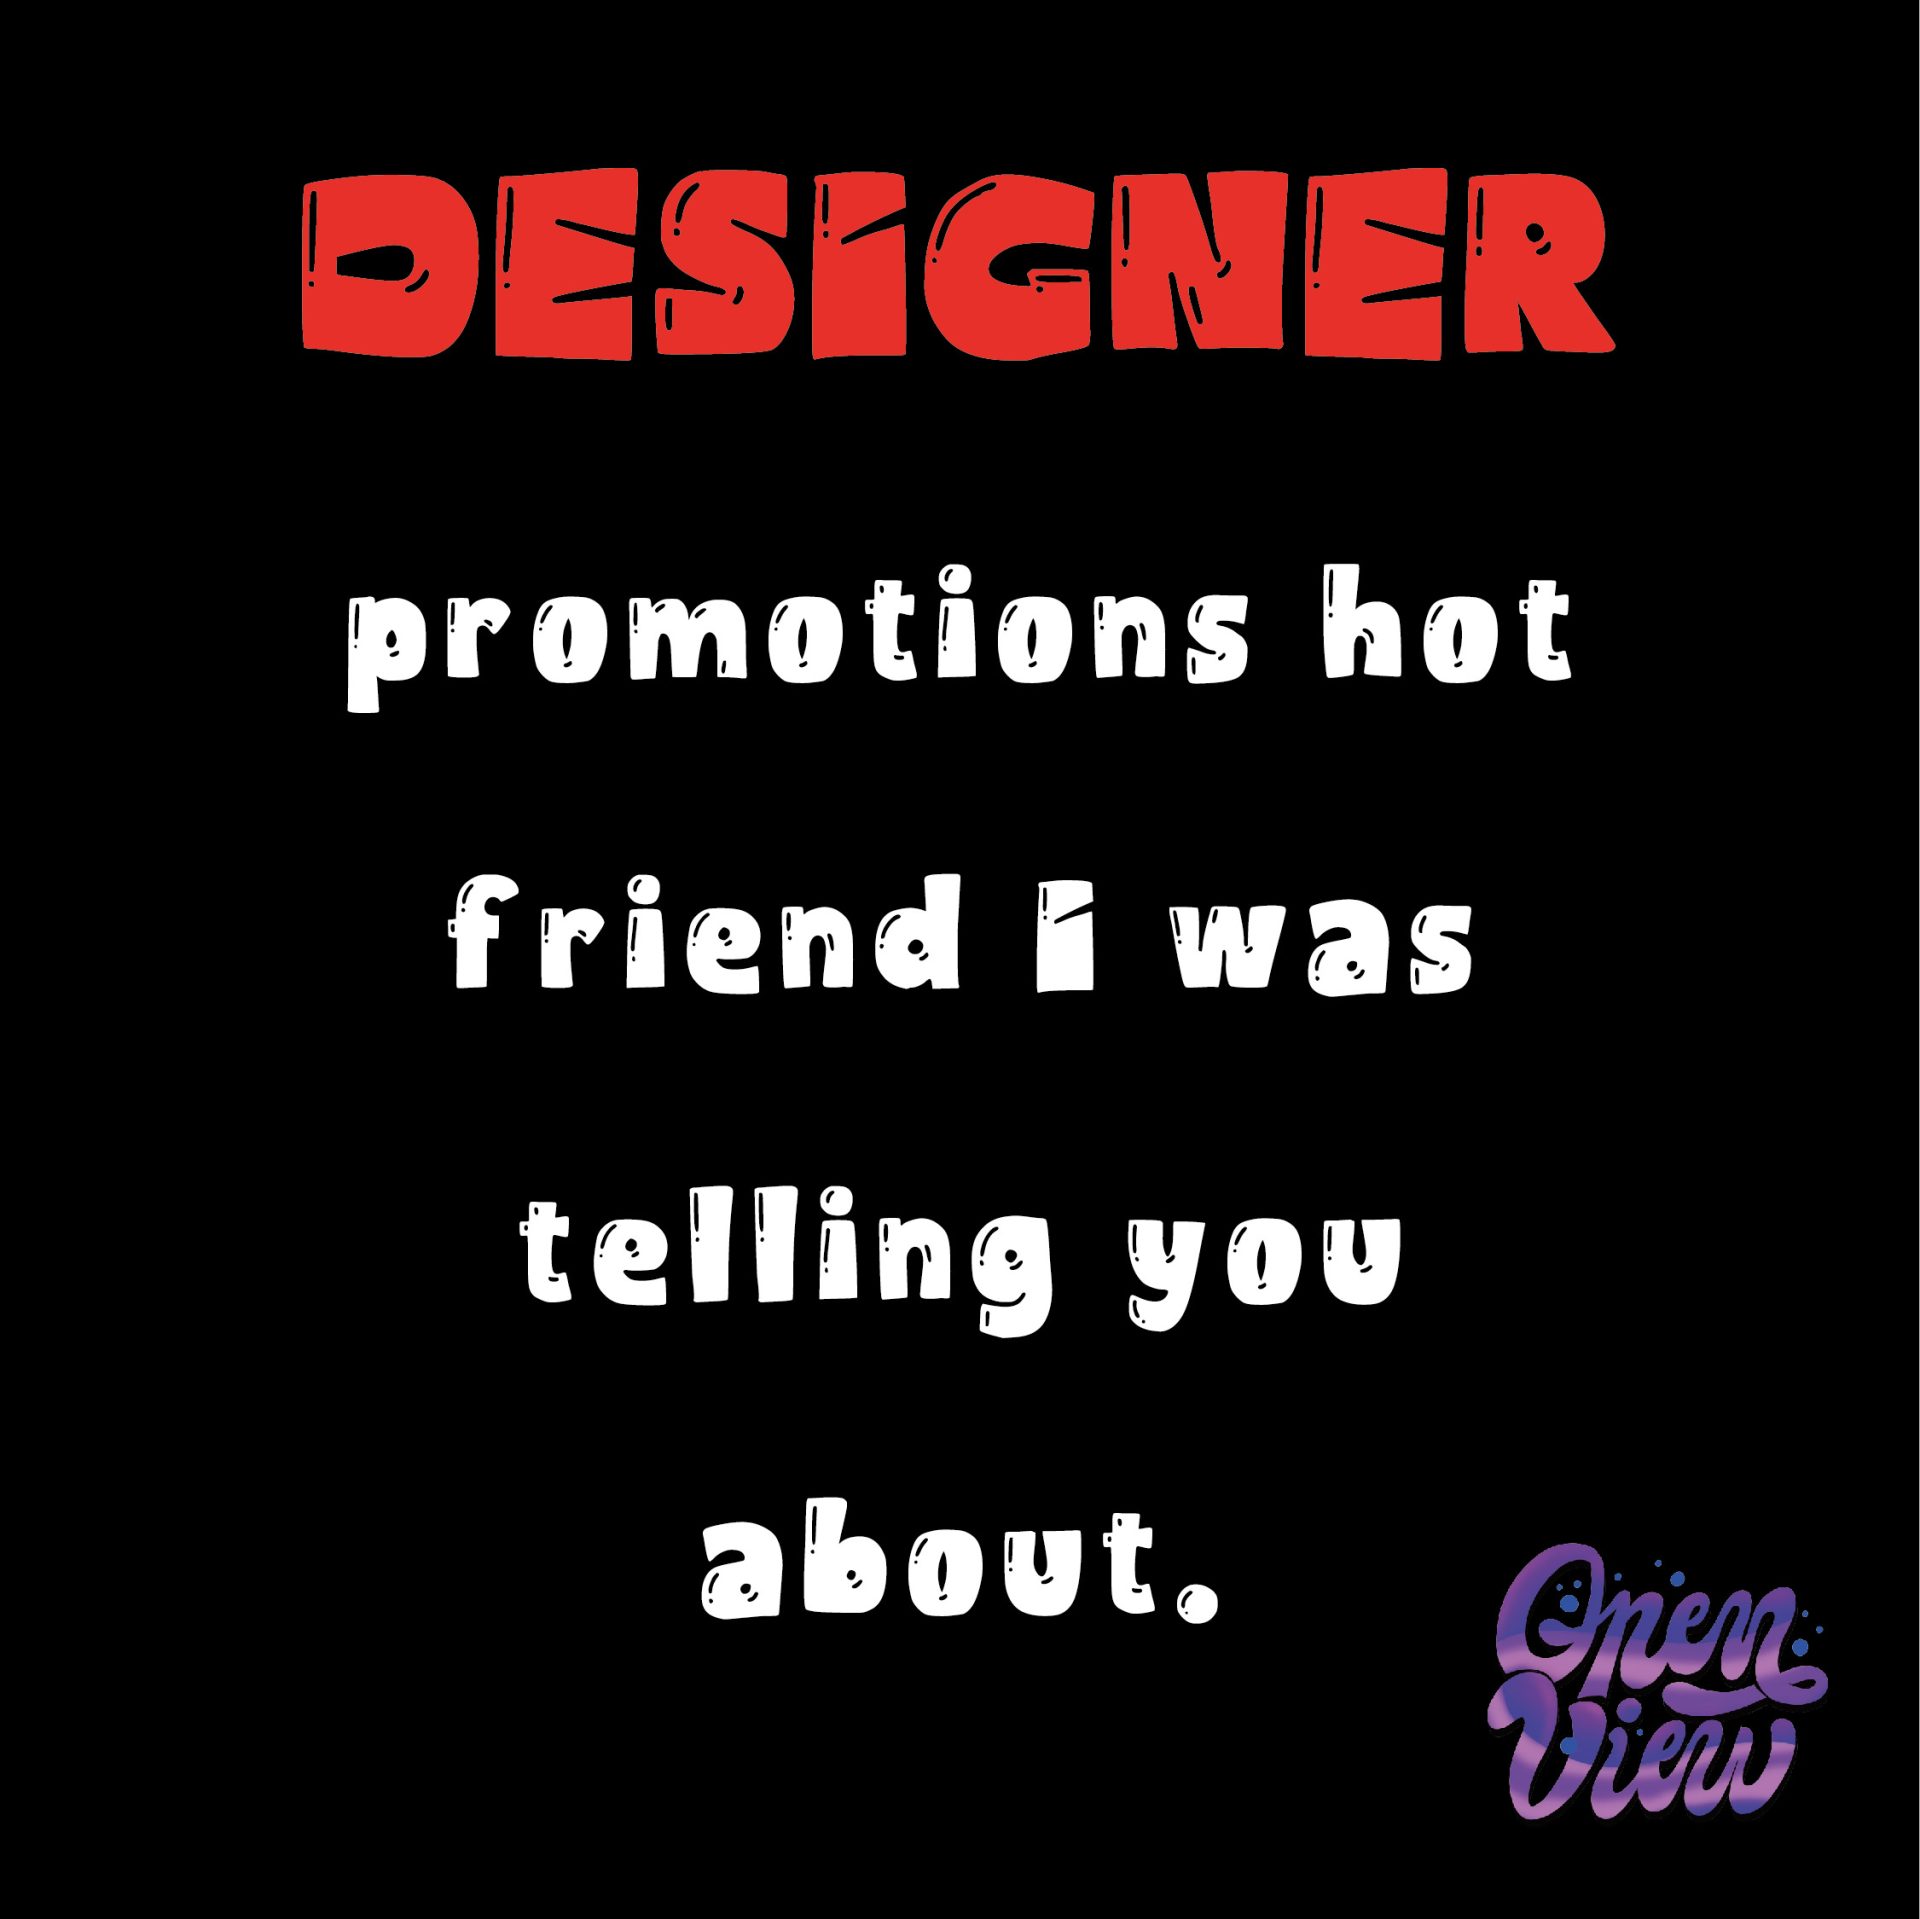 openview promo credentials designer promotions hot friend